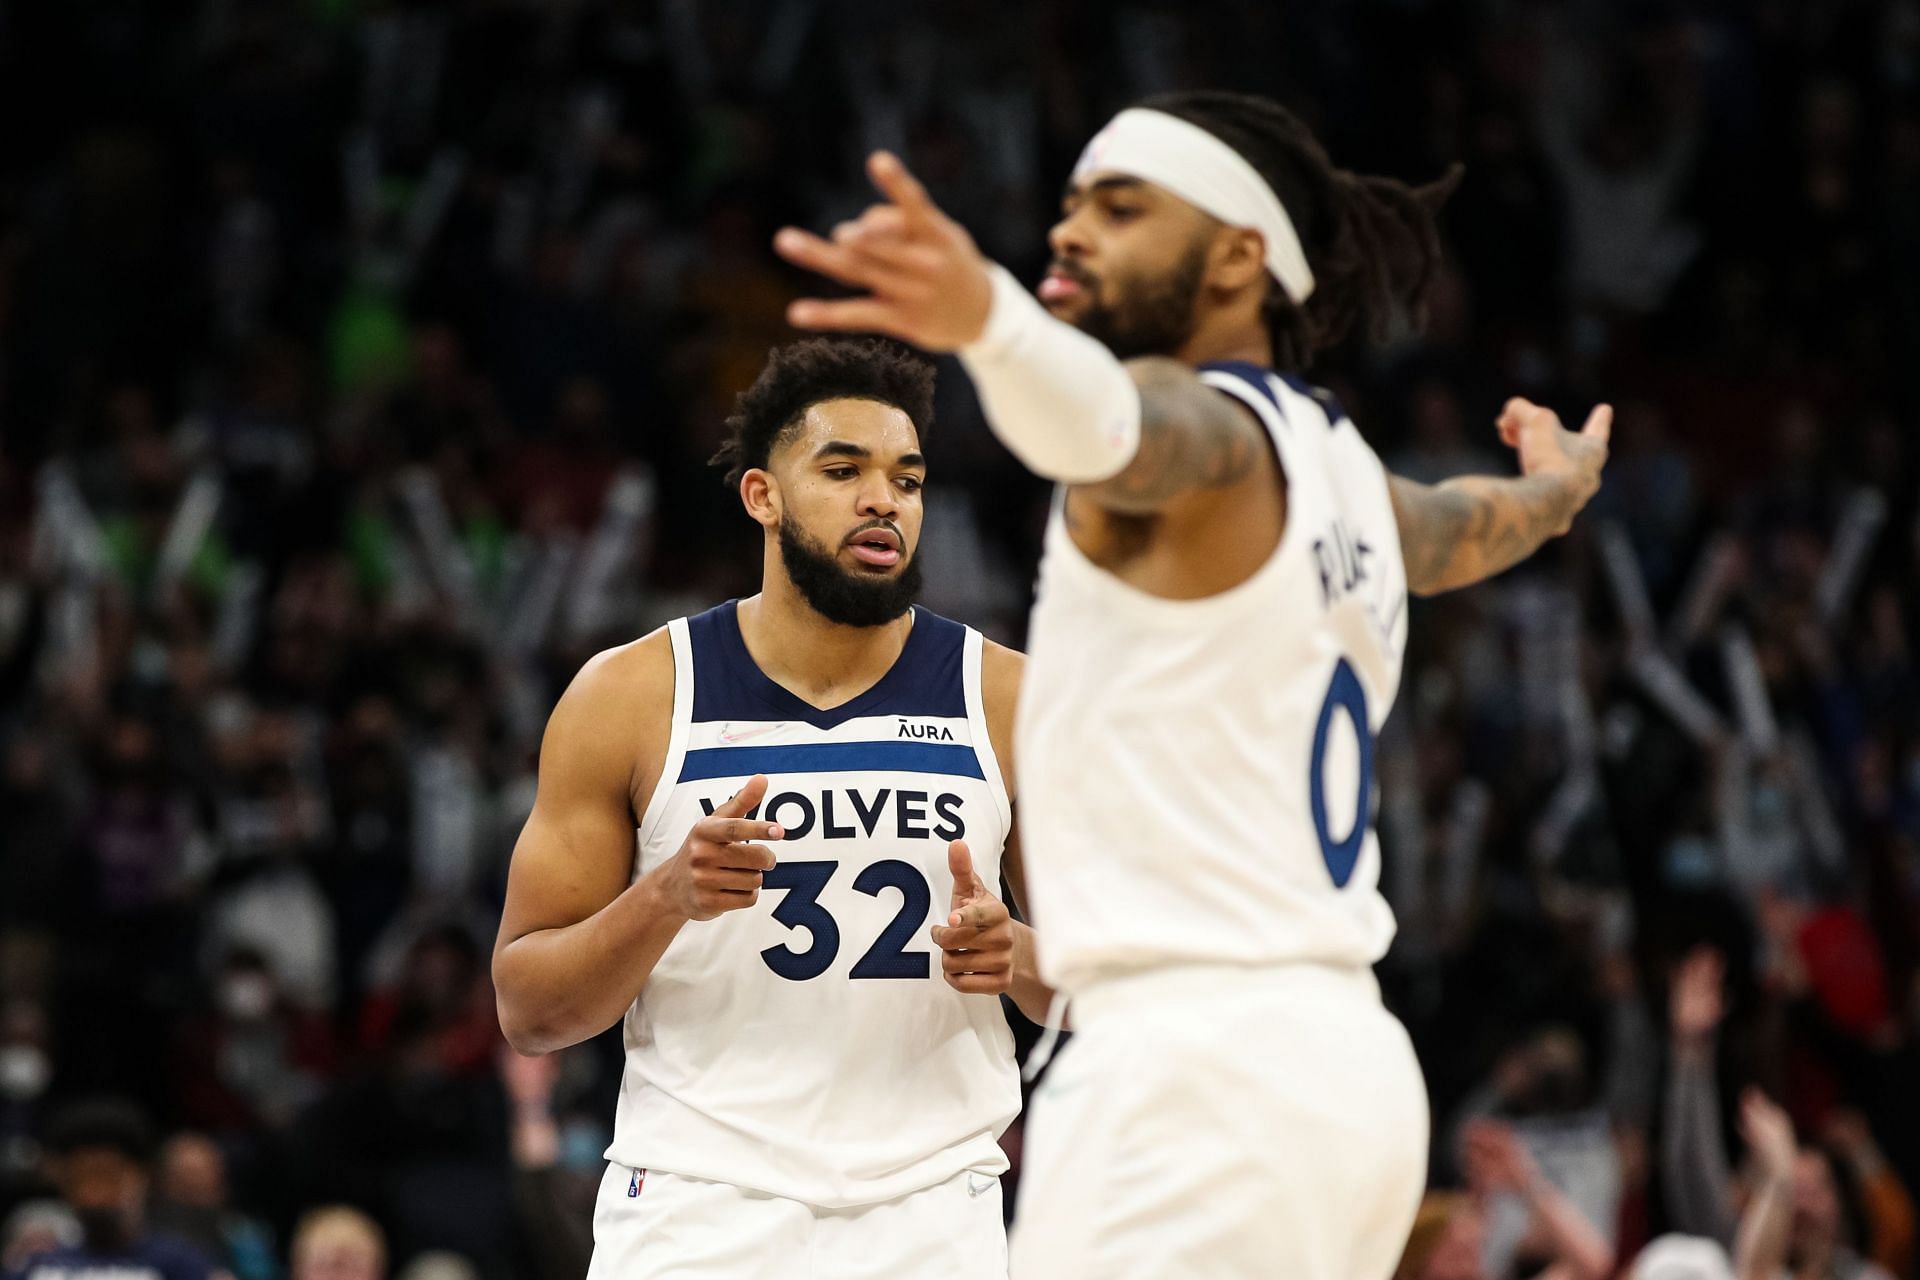 The Minnesota Timberwolves played their most complete game of the season after rallying to beat Ja Morant and the Memphis Grizzlies